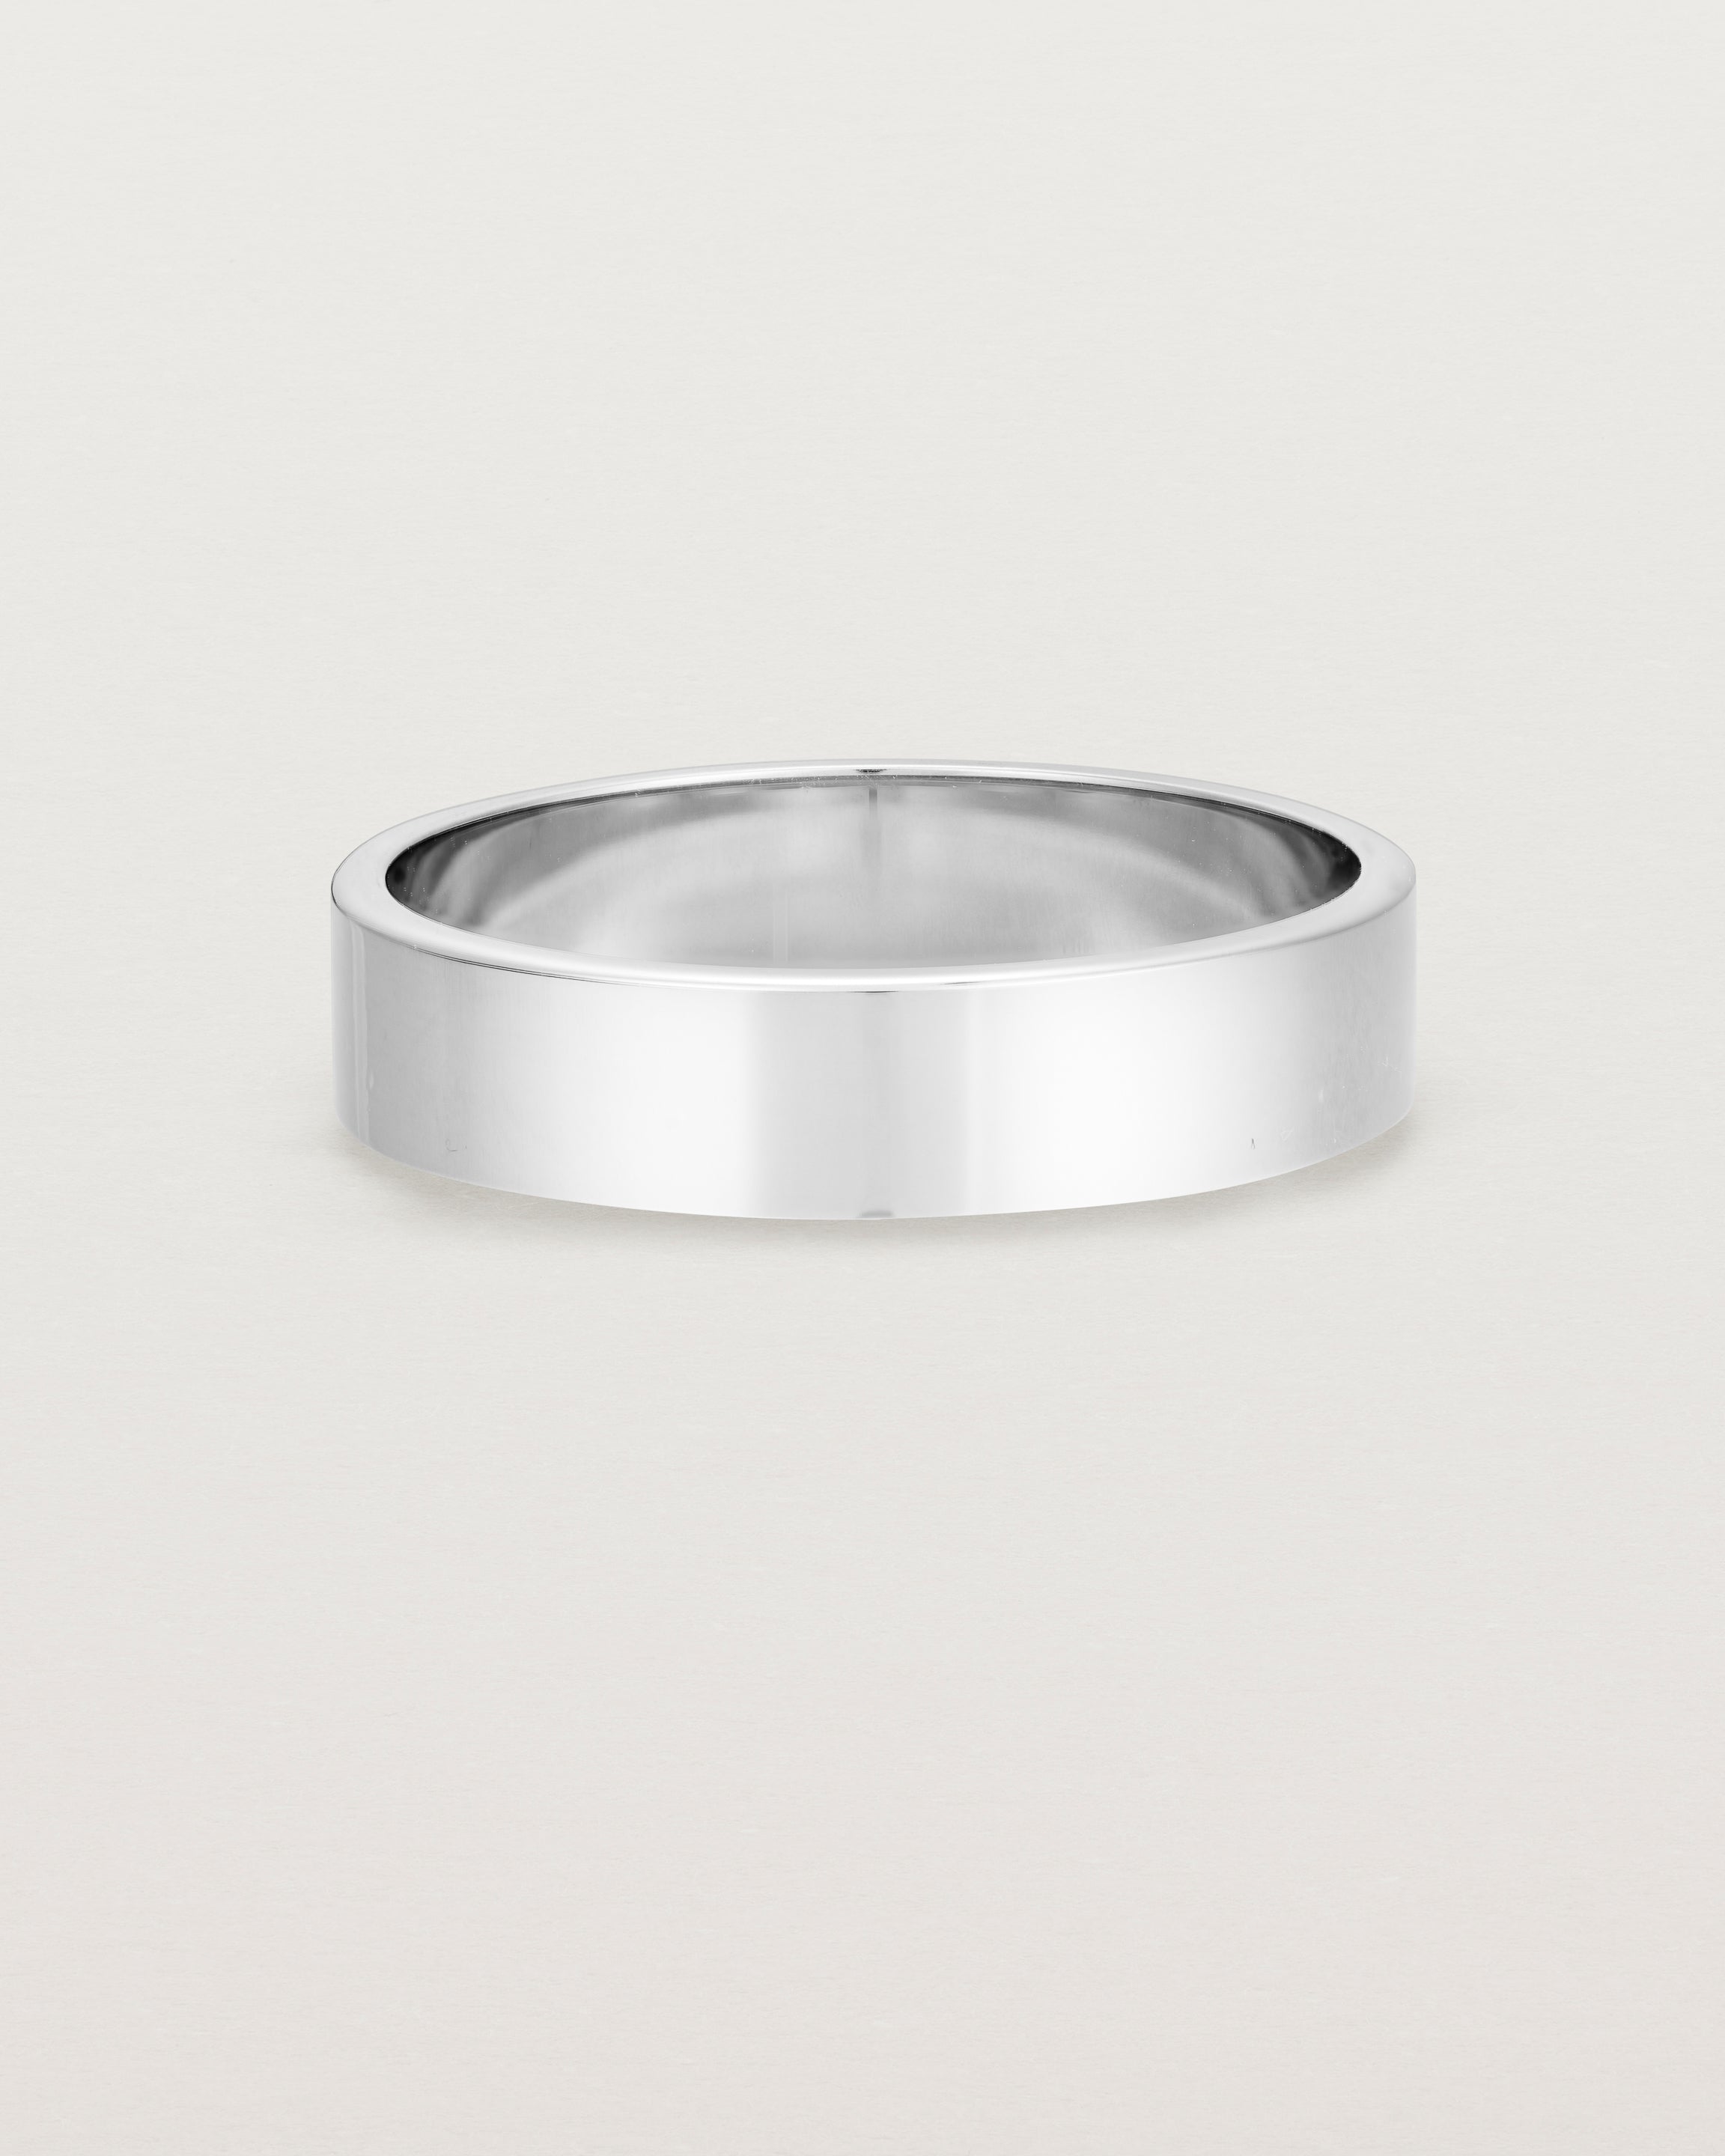 Our square, flat 5mm profile wedding band crafted in sterling silver